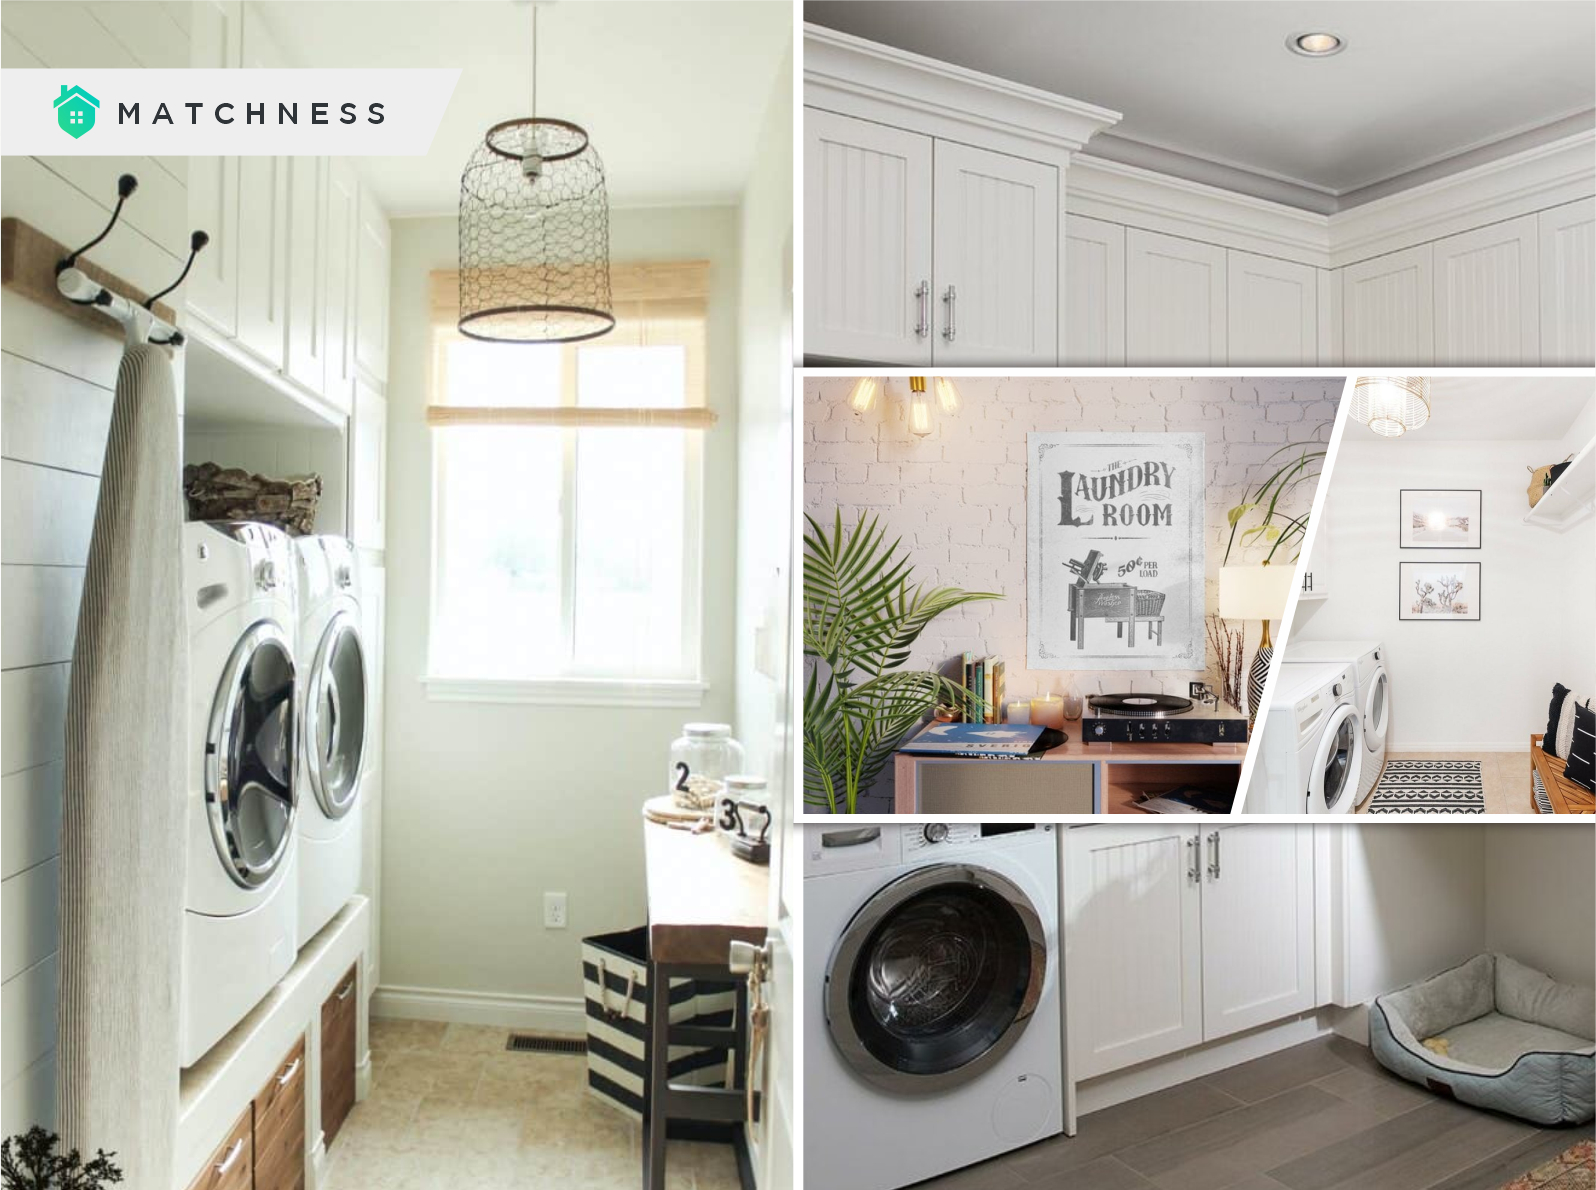 Laundry Room Lighting Ideas For New Space To Look - Matchness.com